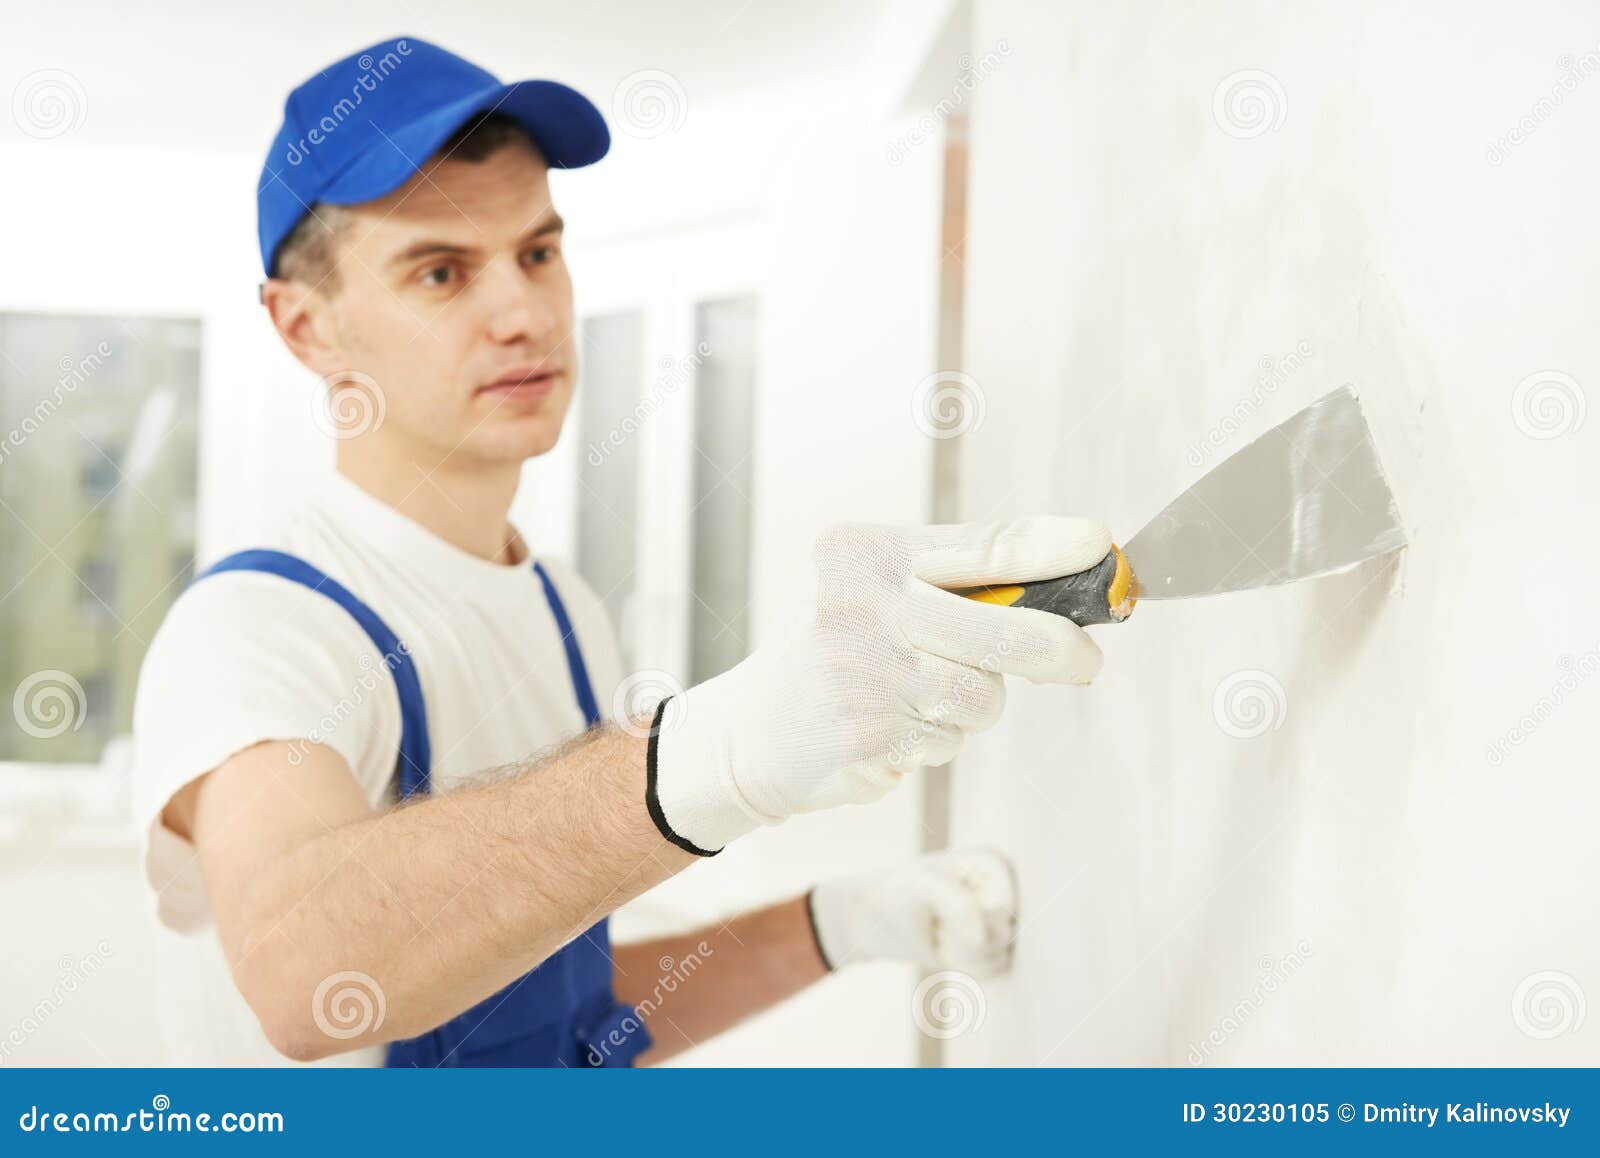 plasterer with putty knife at wall filling